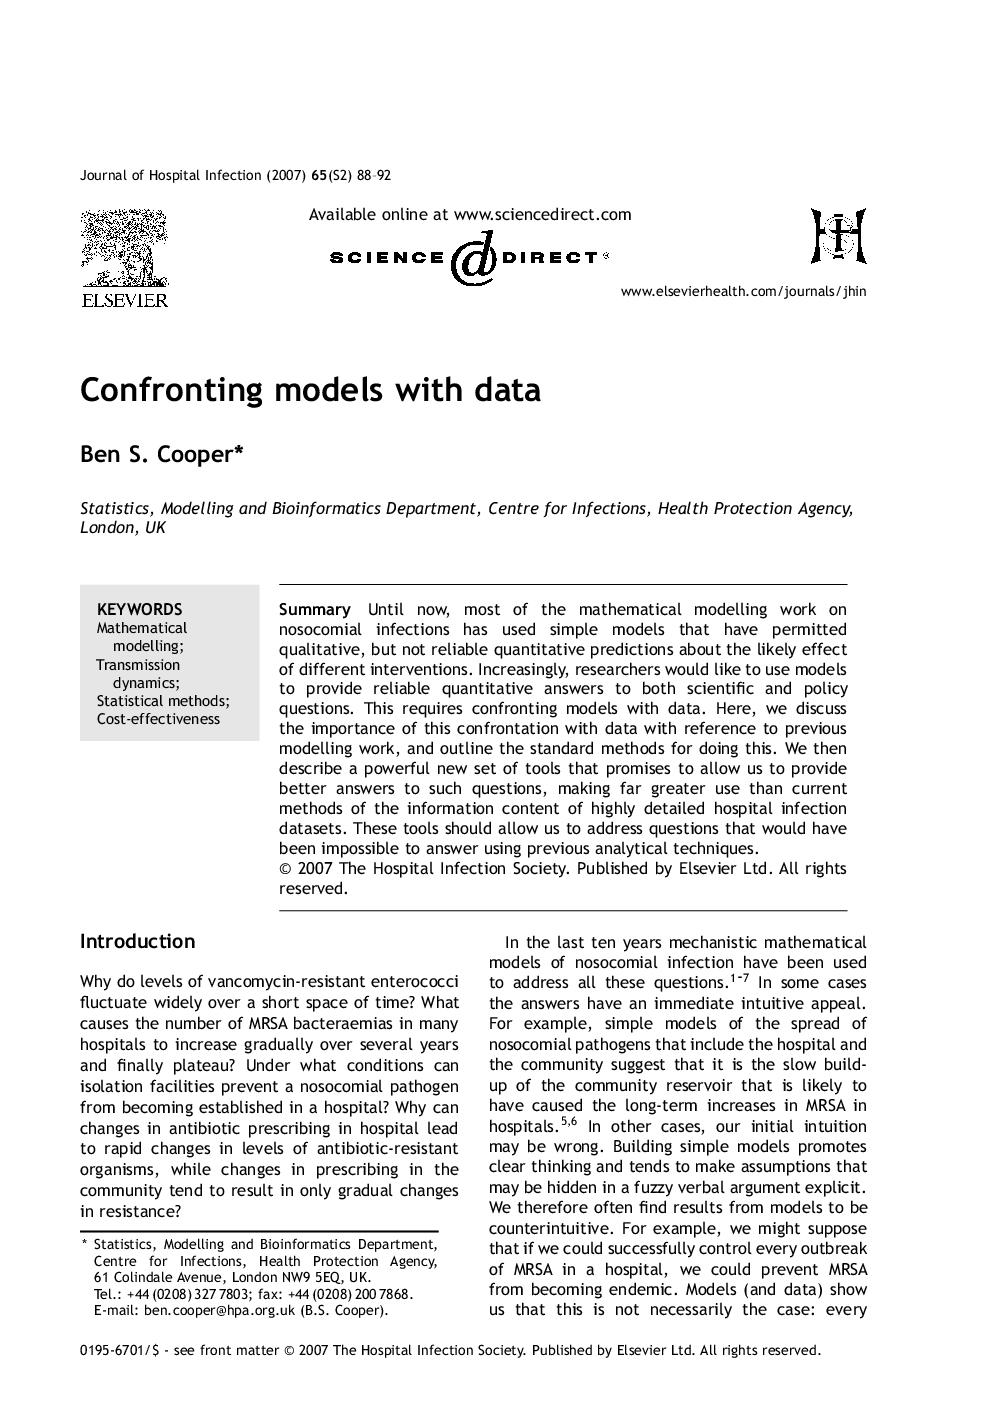 Confronting models with data